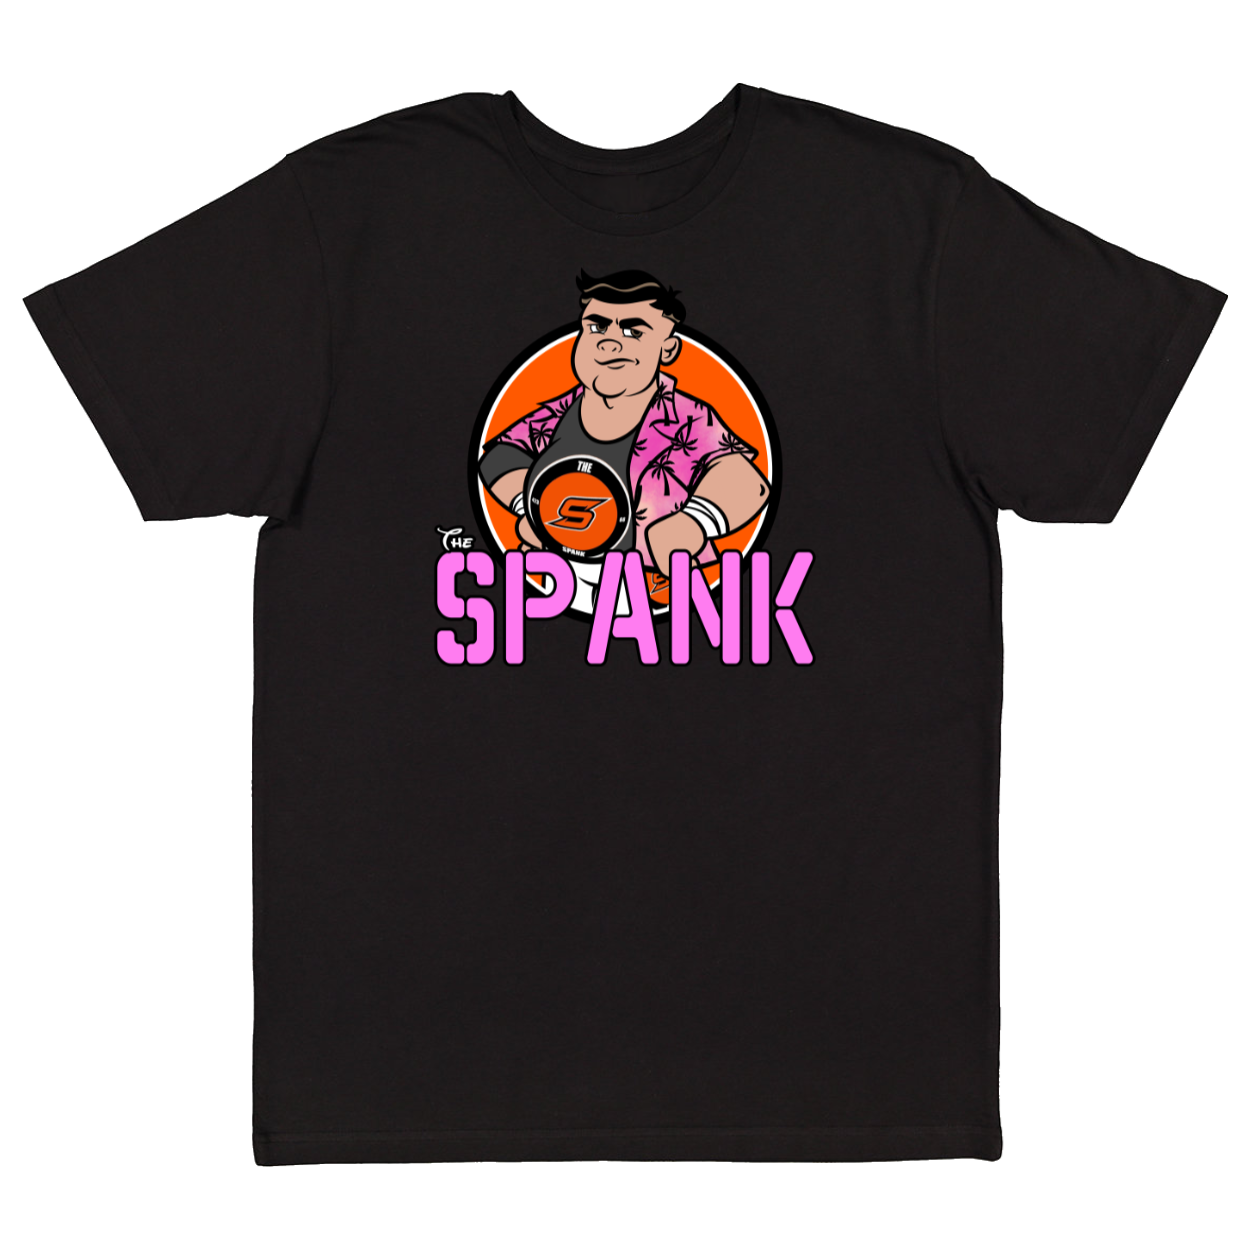 The Spank in Black (T-Shirt)